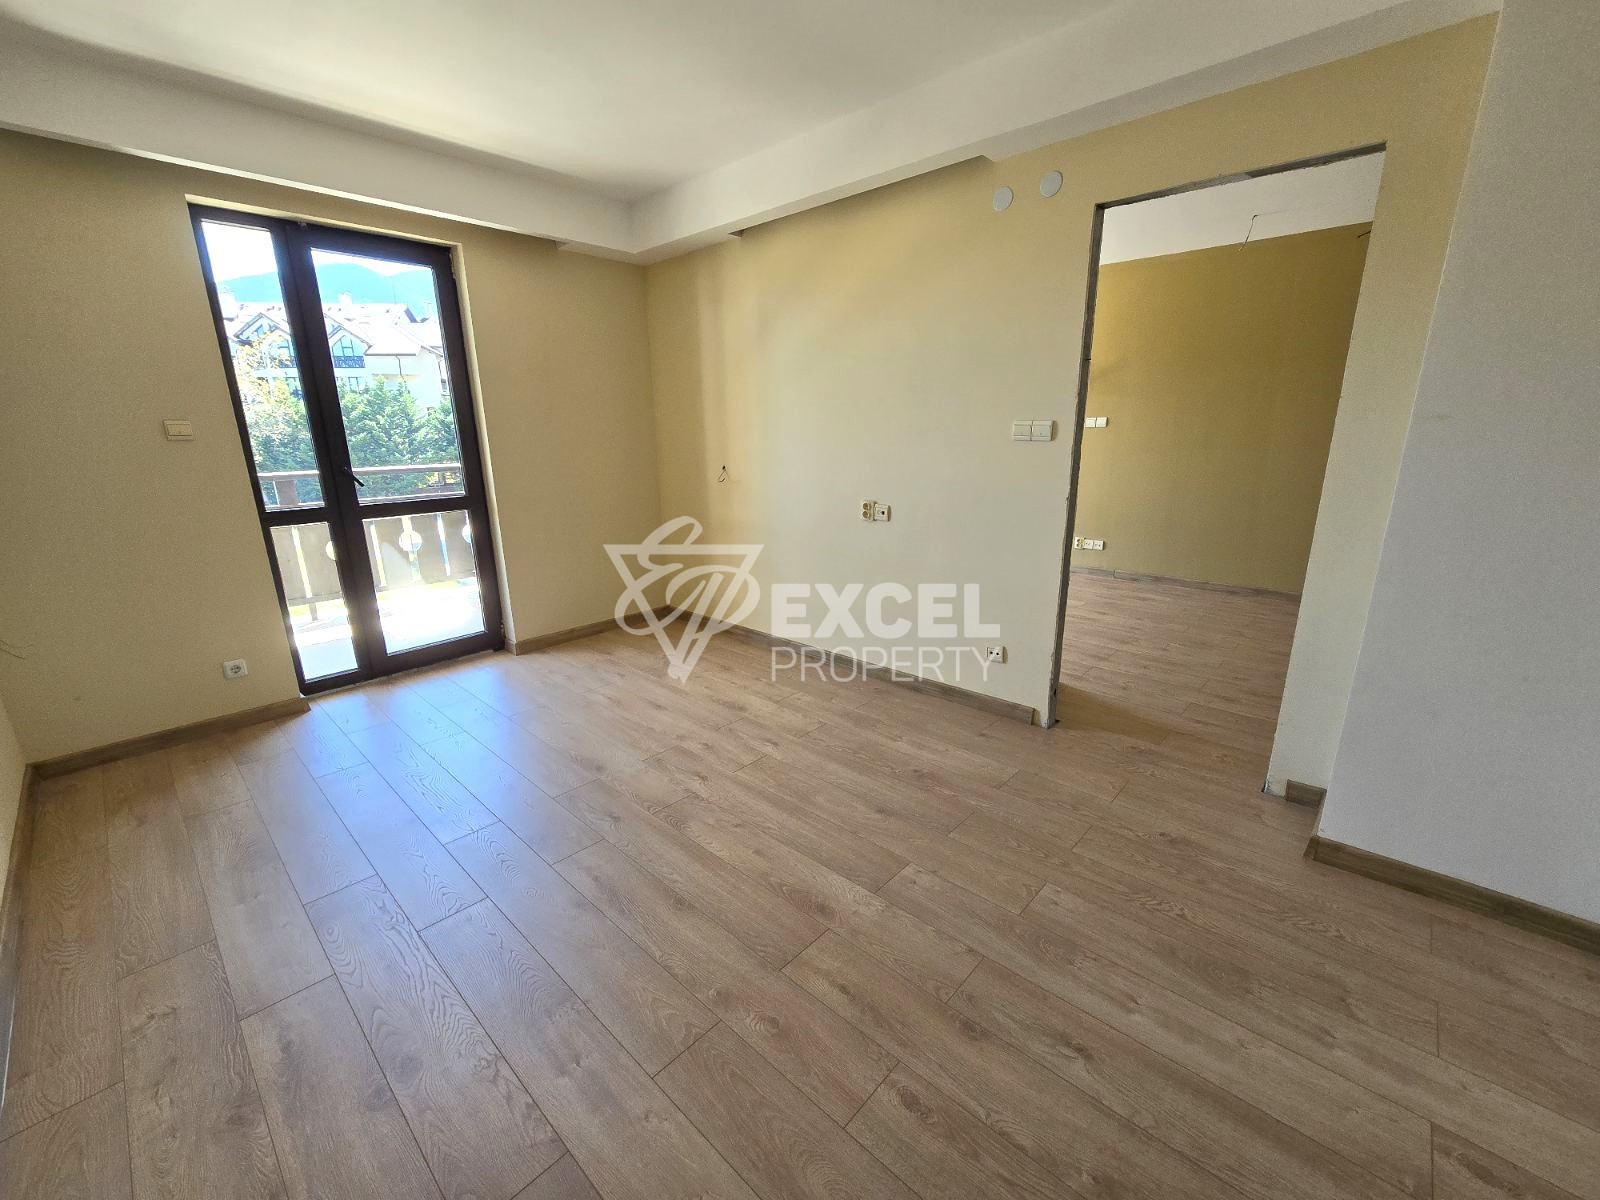 Sunny one-bedroom apartment in a building with a low maintenance fee, 400m from the Gondola